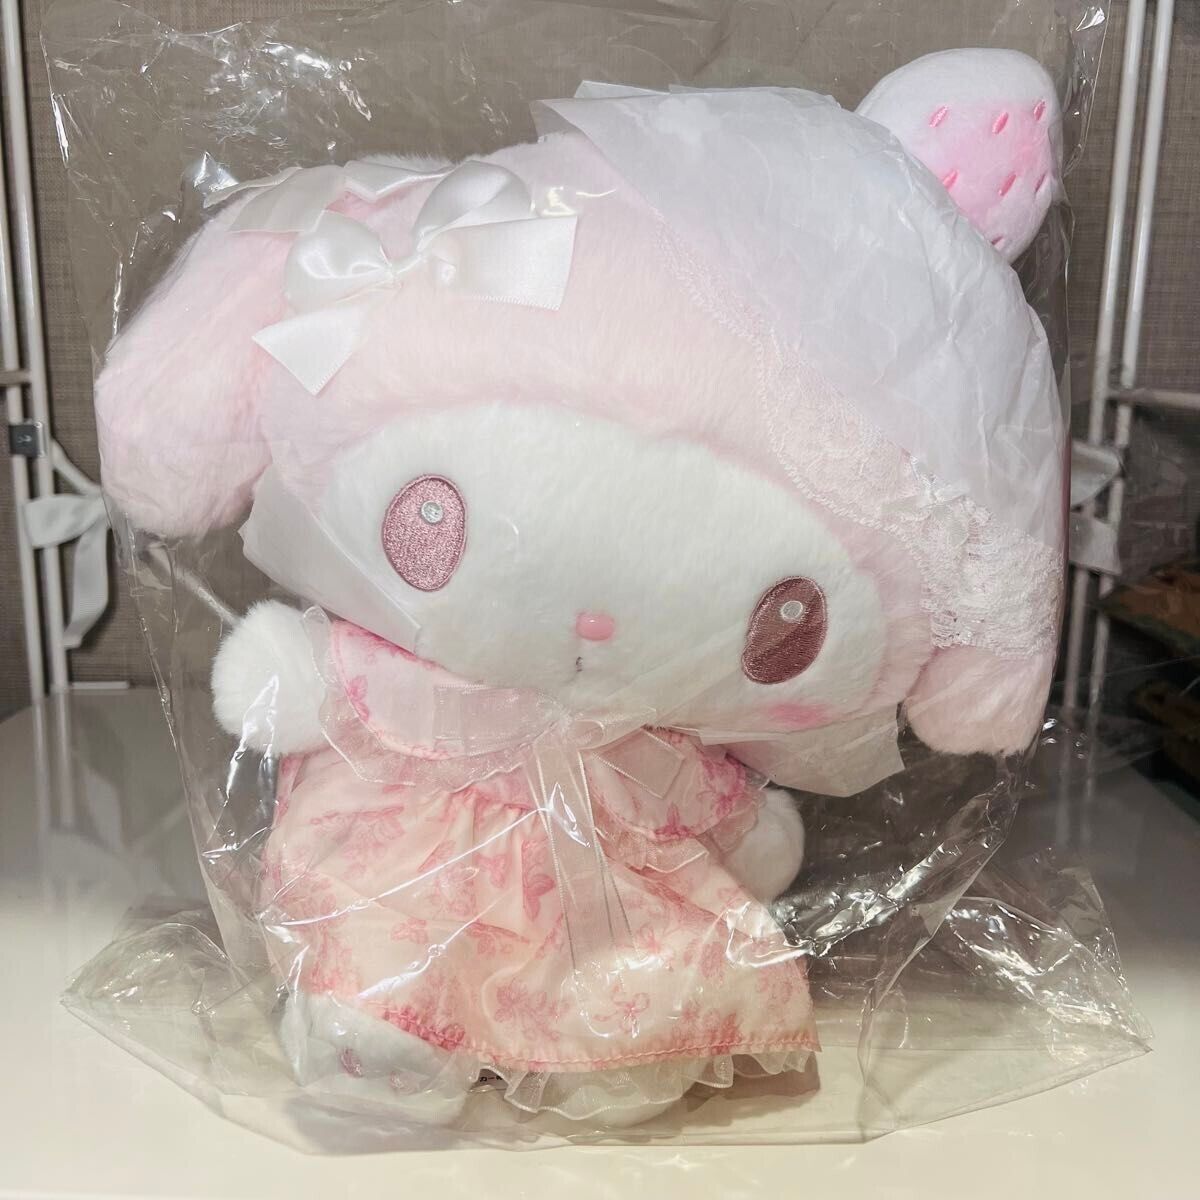 Sanrio My Melody Birthday Doll Plush Doll White Strawberry Tea Time from Japan